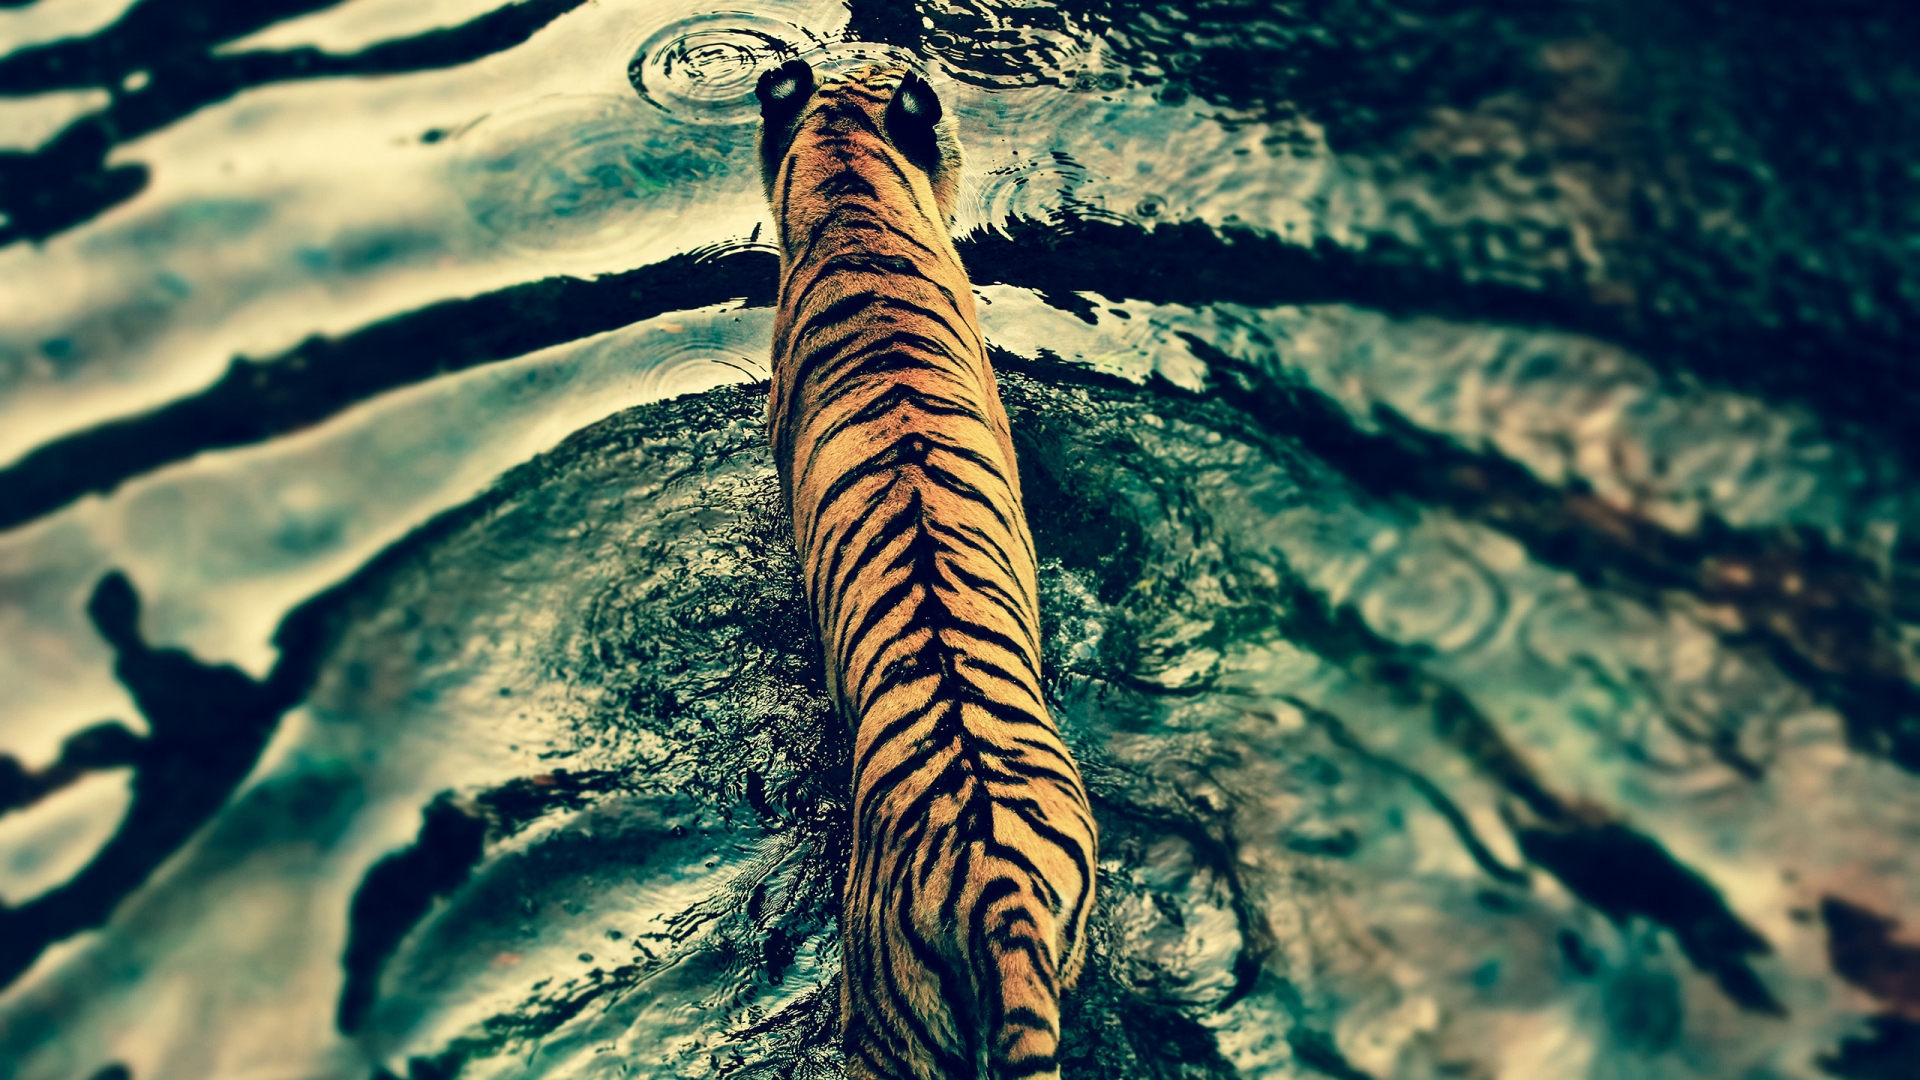 Beautiful Tiger in Water for 1920 x 1080 HDTV 1080p resolution